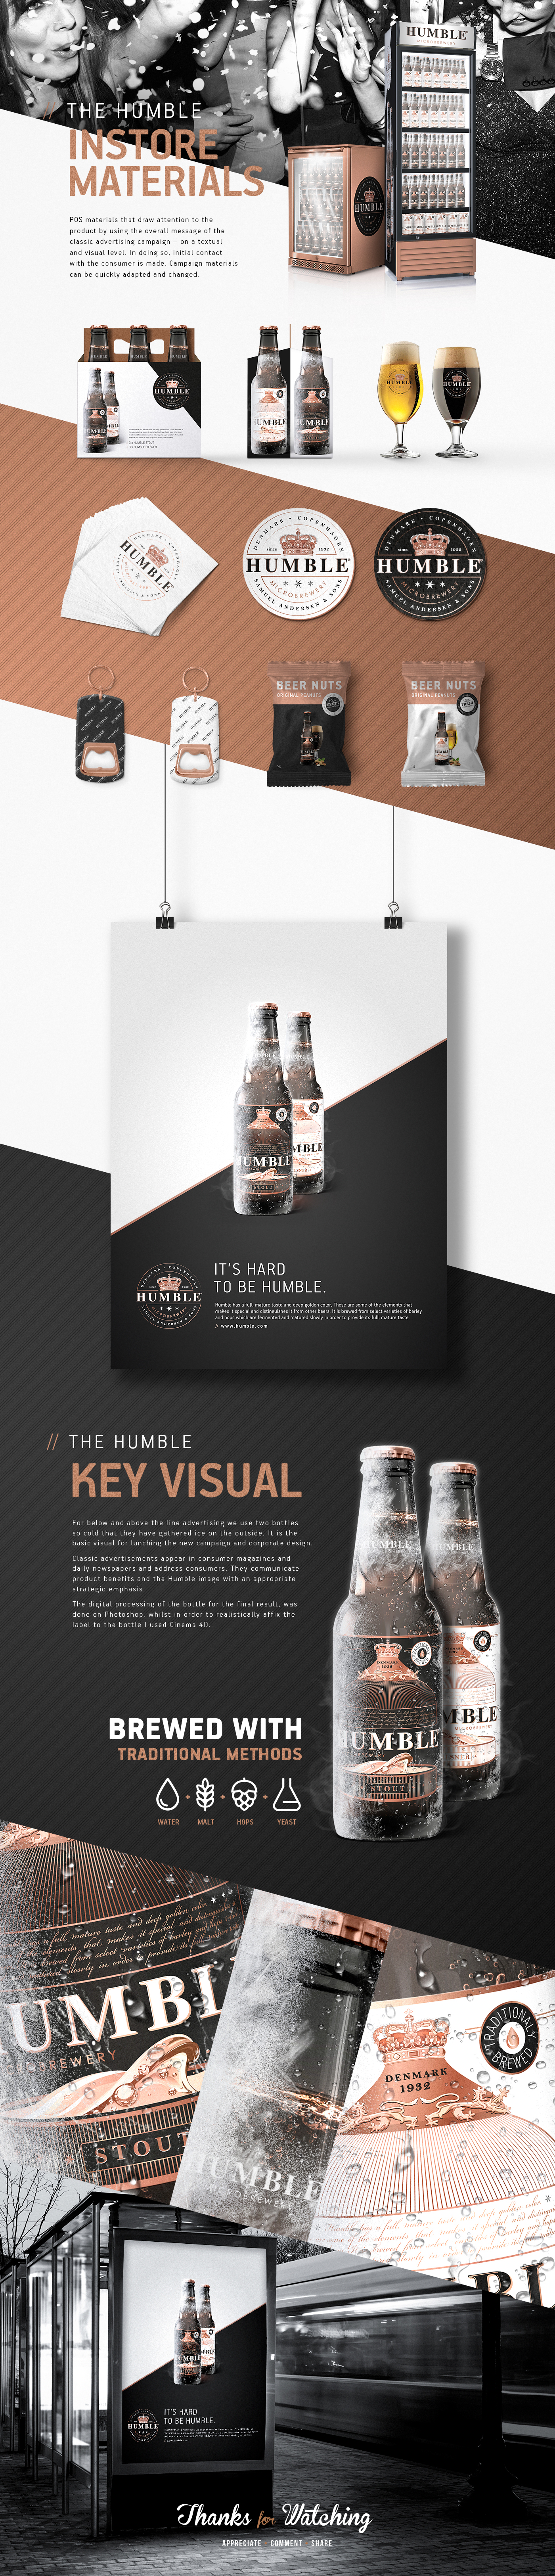 beer brewery logo corporate design Label brand manual alcohol Packaging bottle